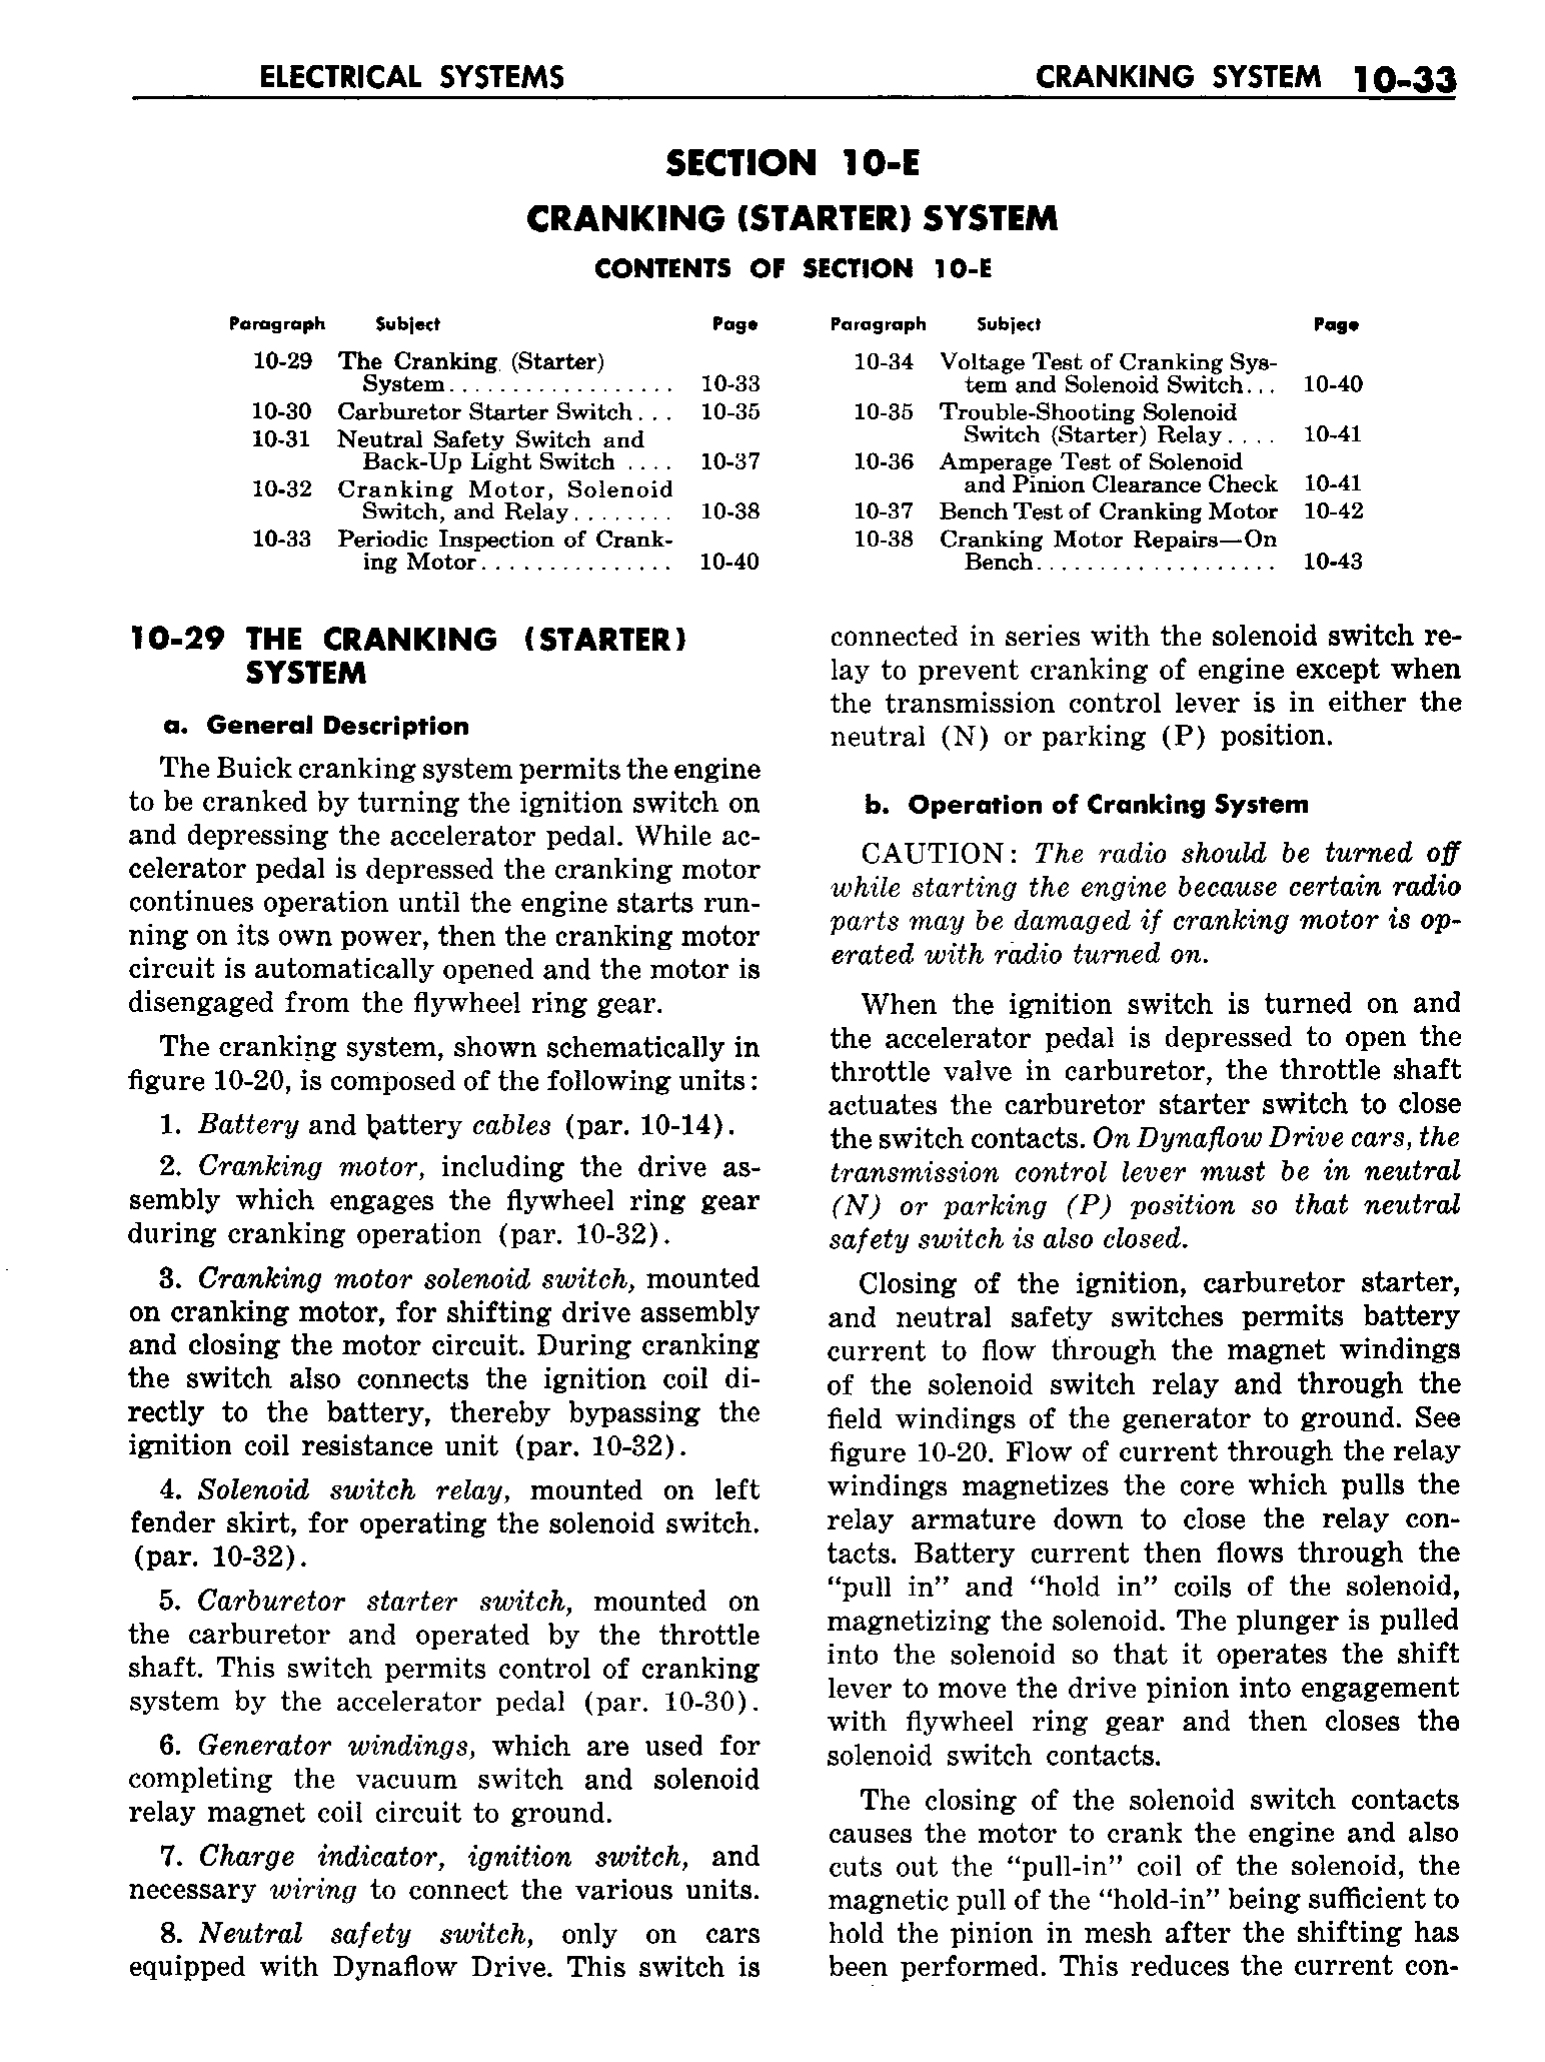 n_11 1958 Buick Shop Manual - Electrical Systems_33.jpg